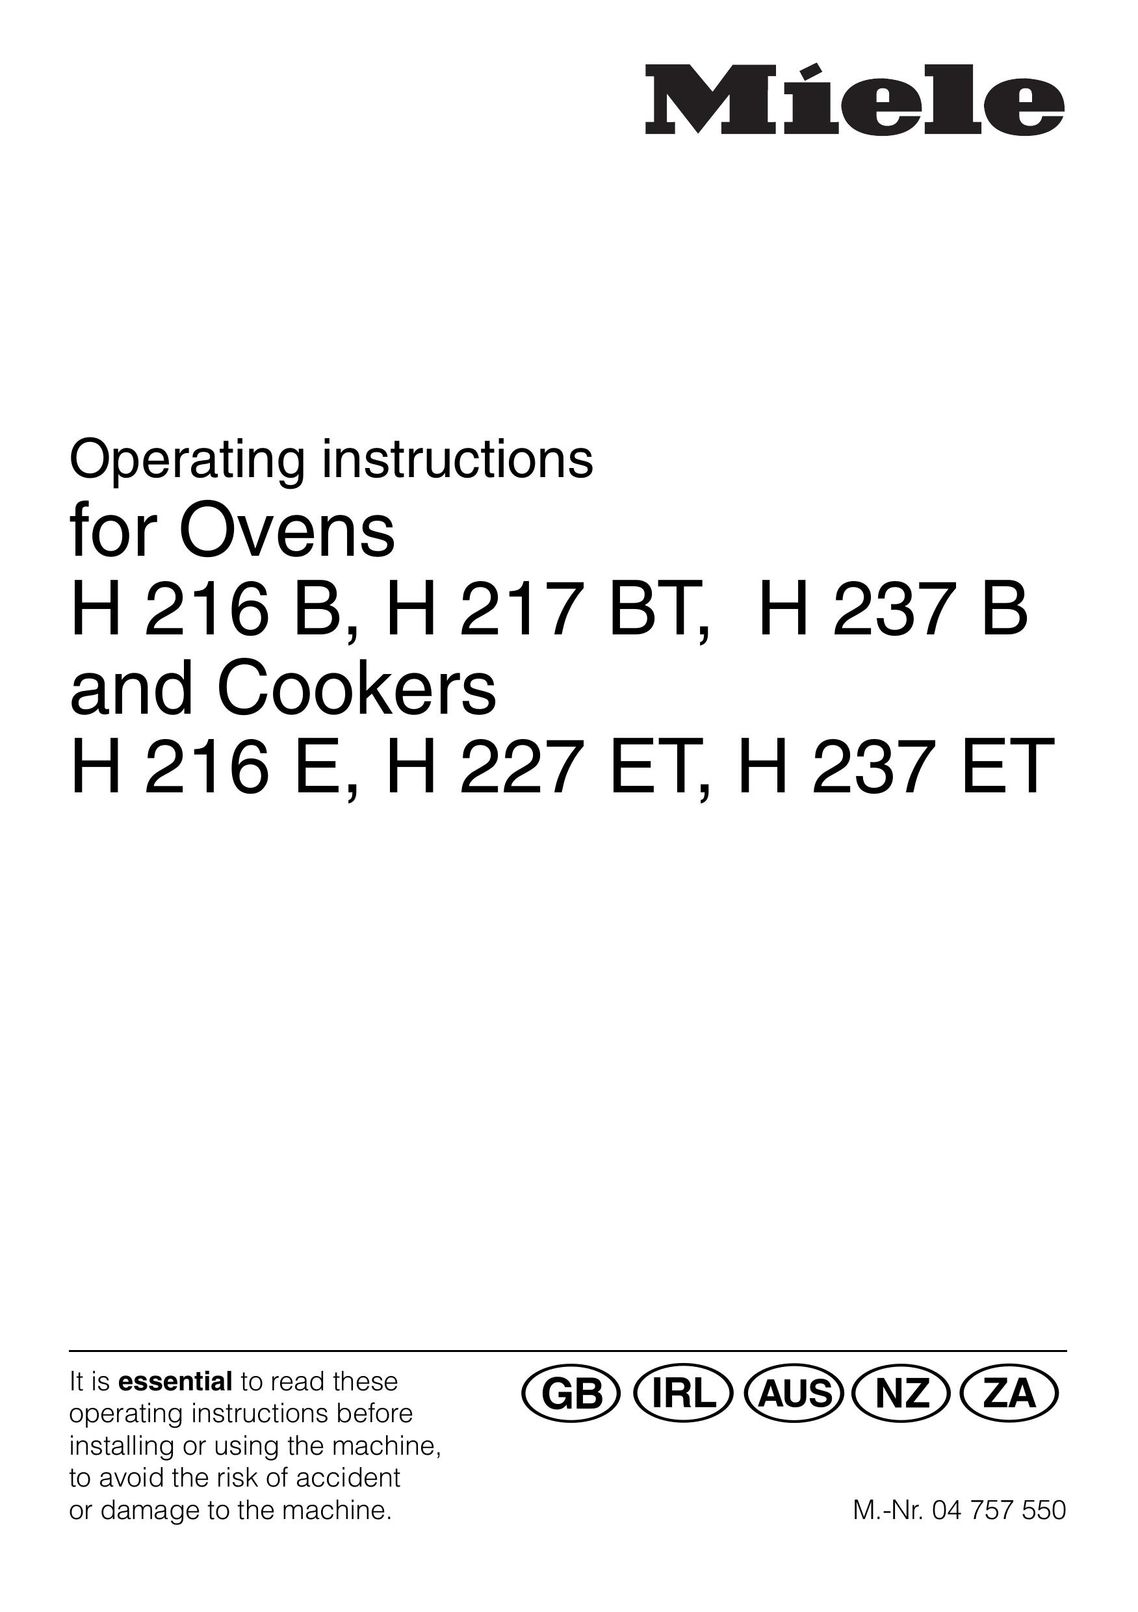 Miele H 237 B Double Oven User Manual